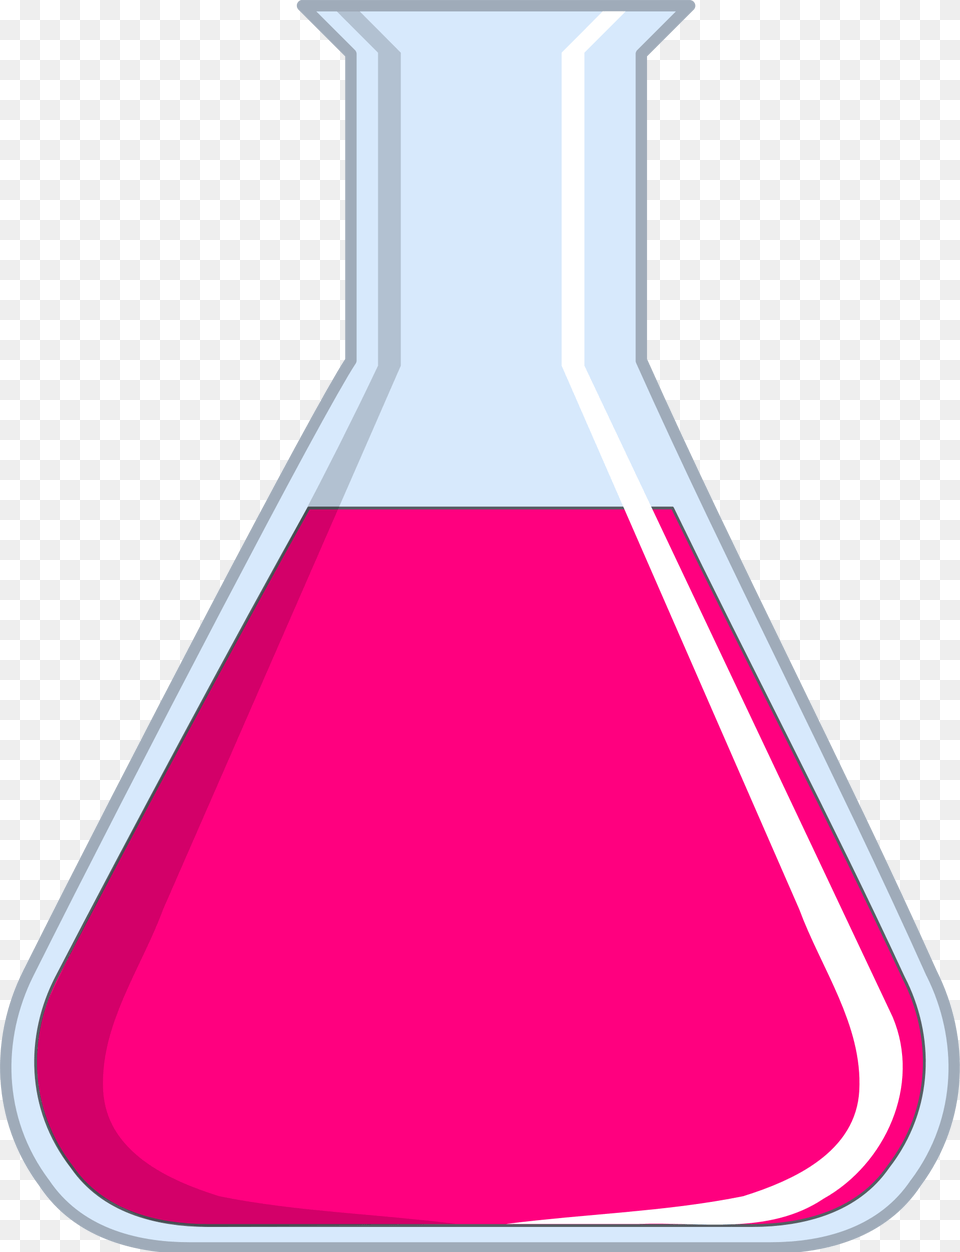 Test Tube Containing Pink Liquid, Jar, Bow, Weapon, Cone Png Image